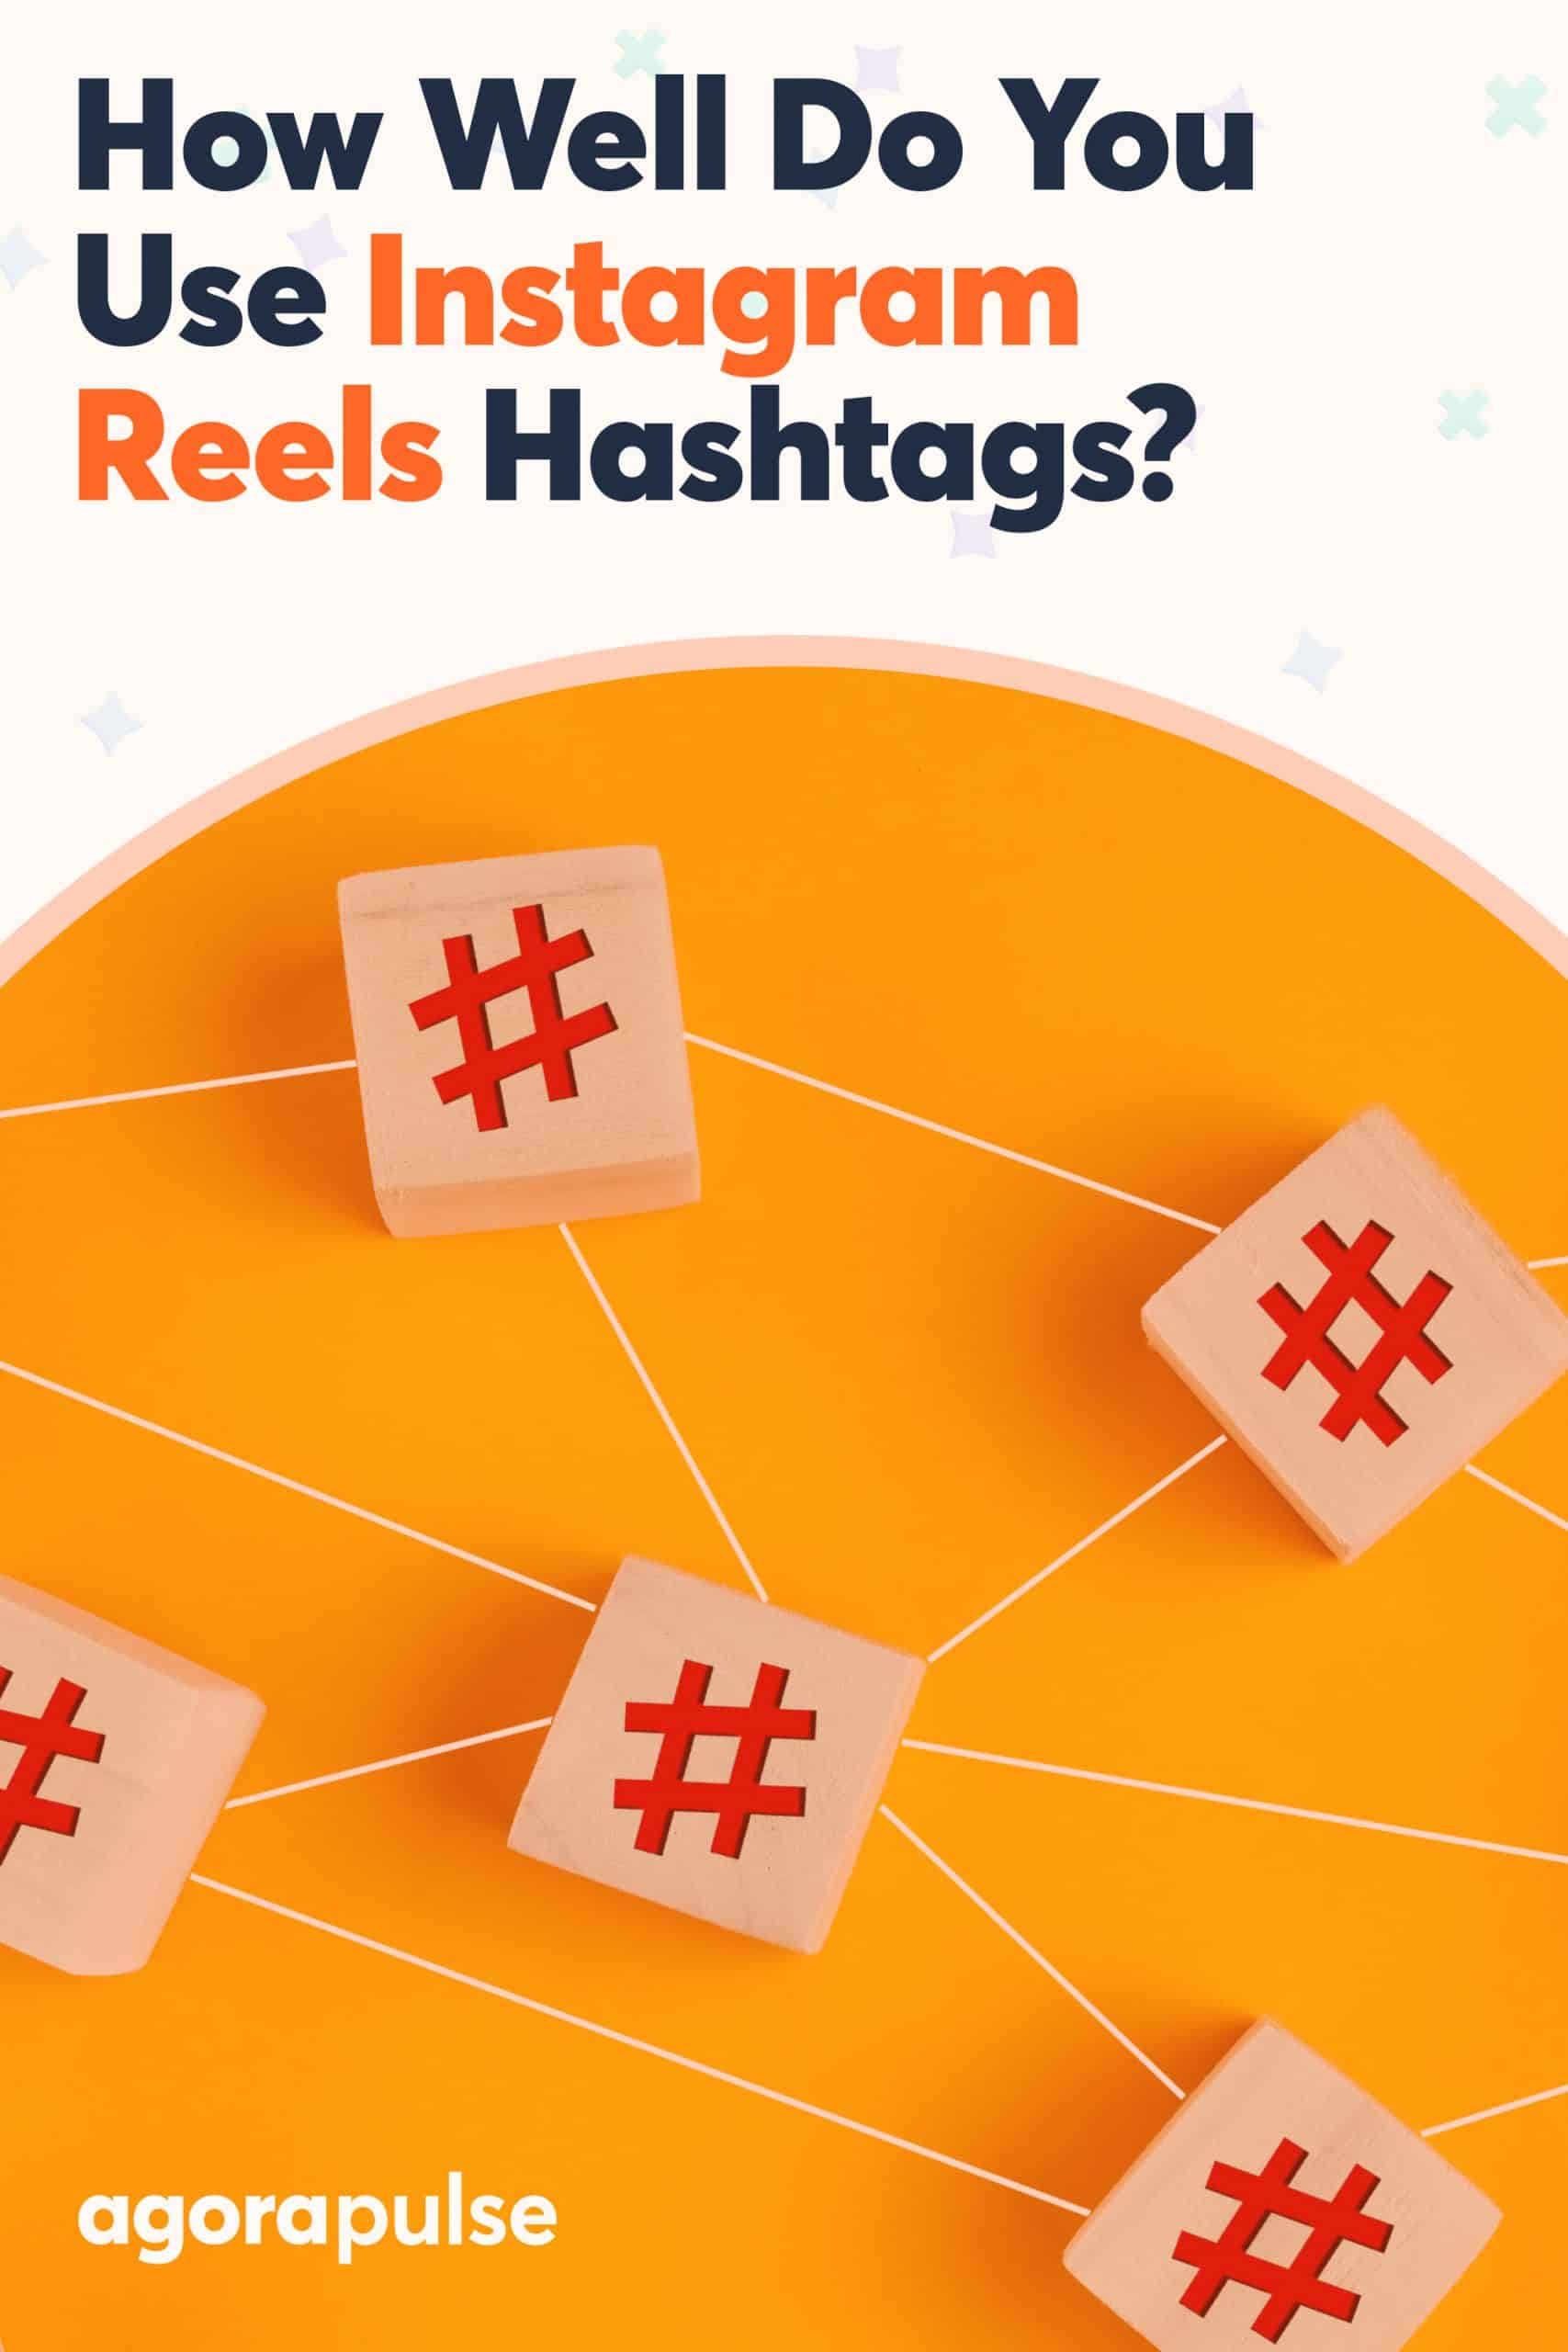 Get Strategic With Instagram Reels Hashtags!